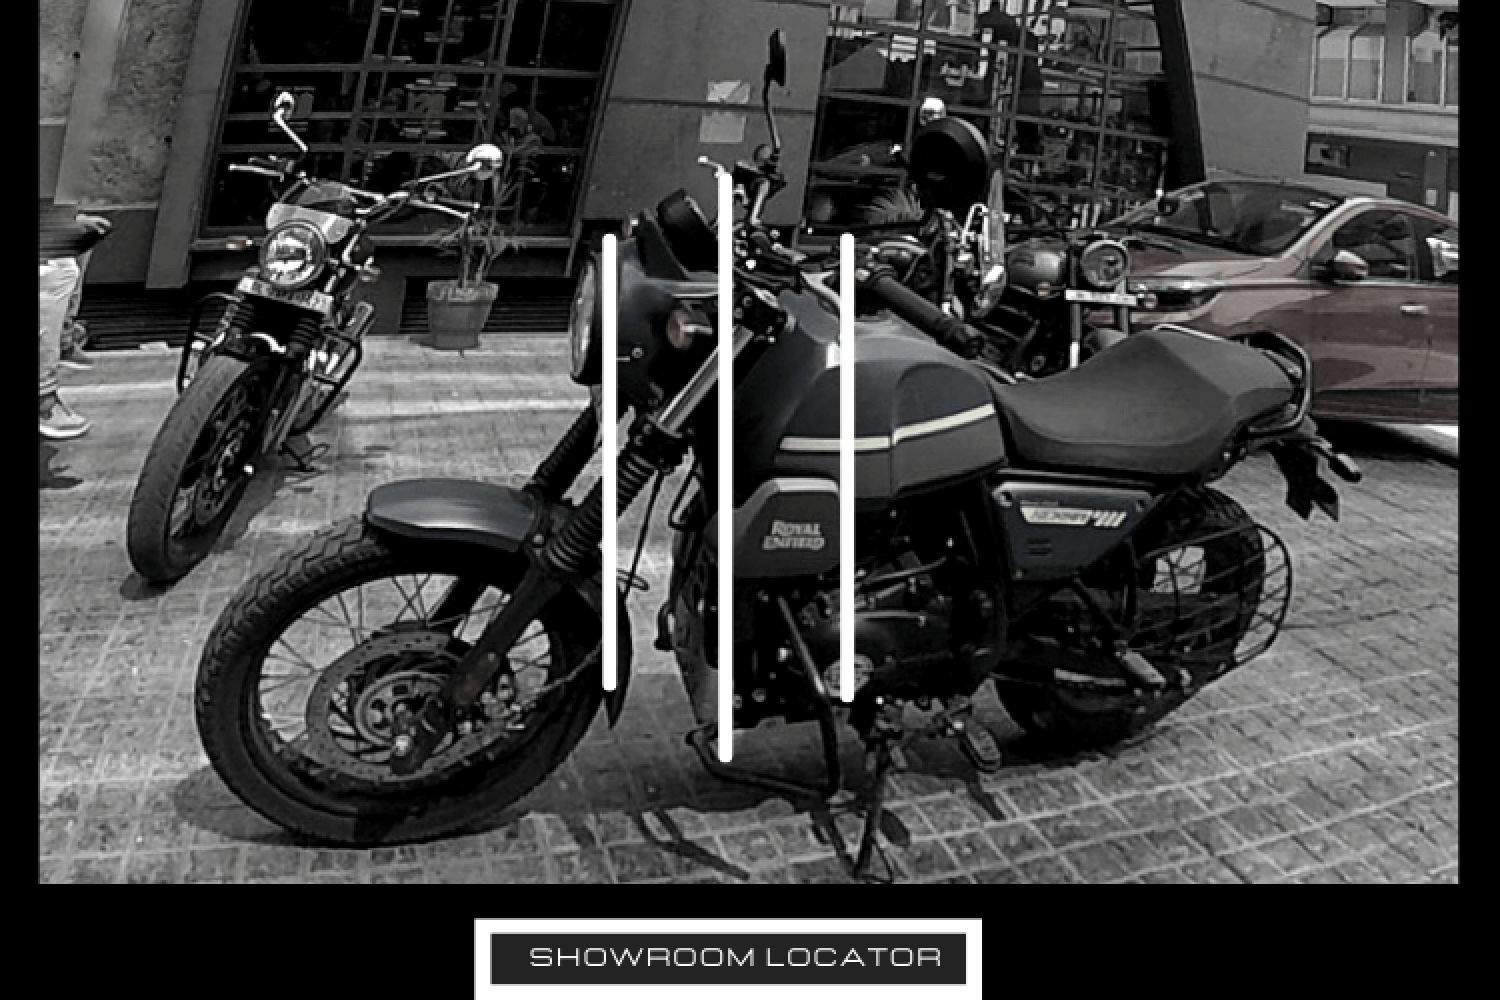 Motopsychcle Services Showroom Locator